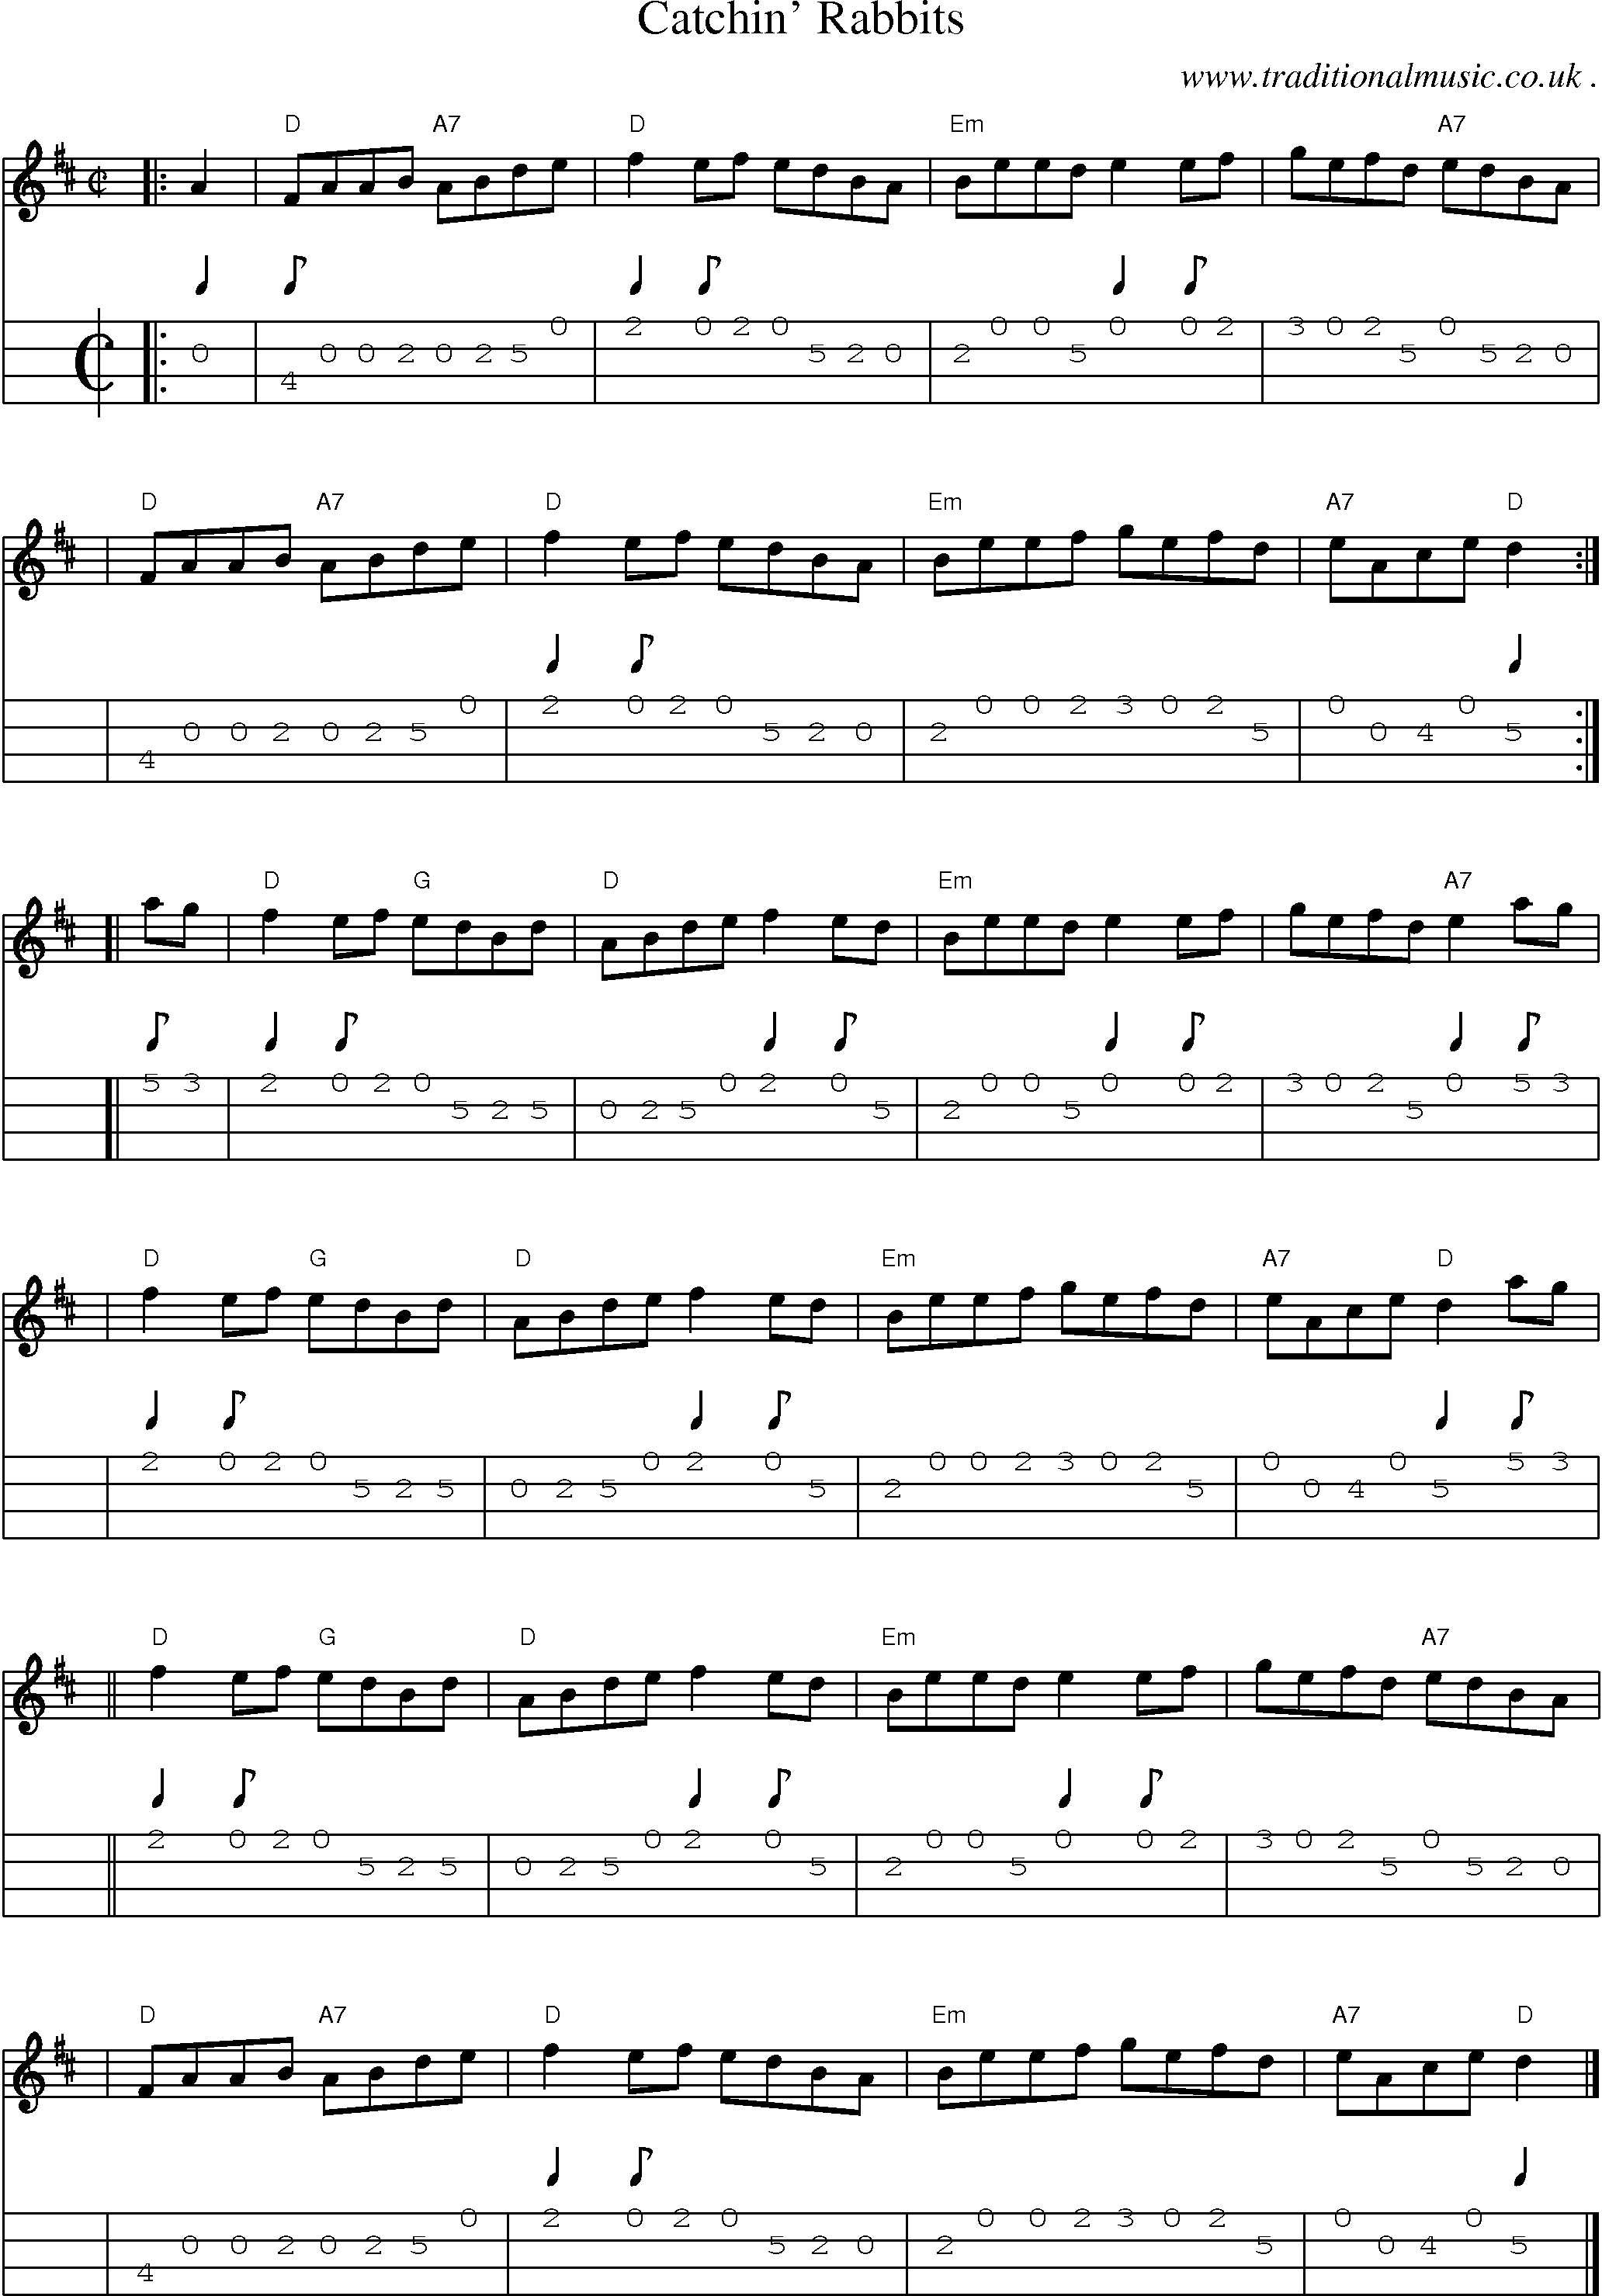 Sheet-music  score, Chords and Mandolin Tabs for Catchin Rabbits